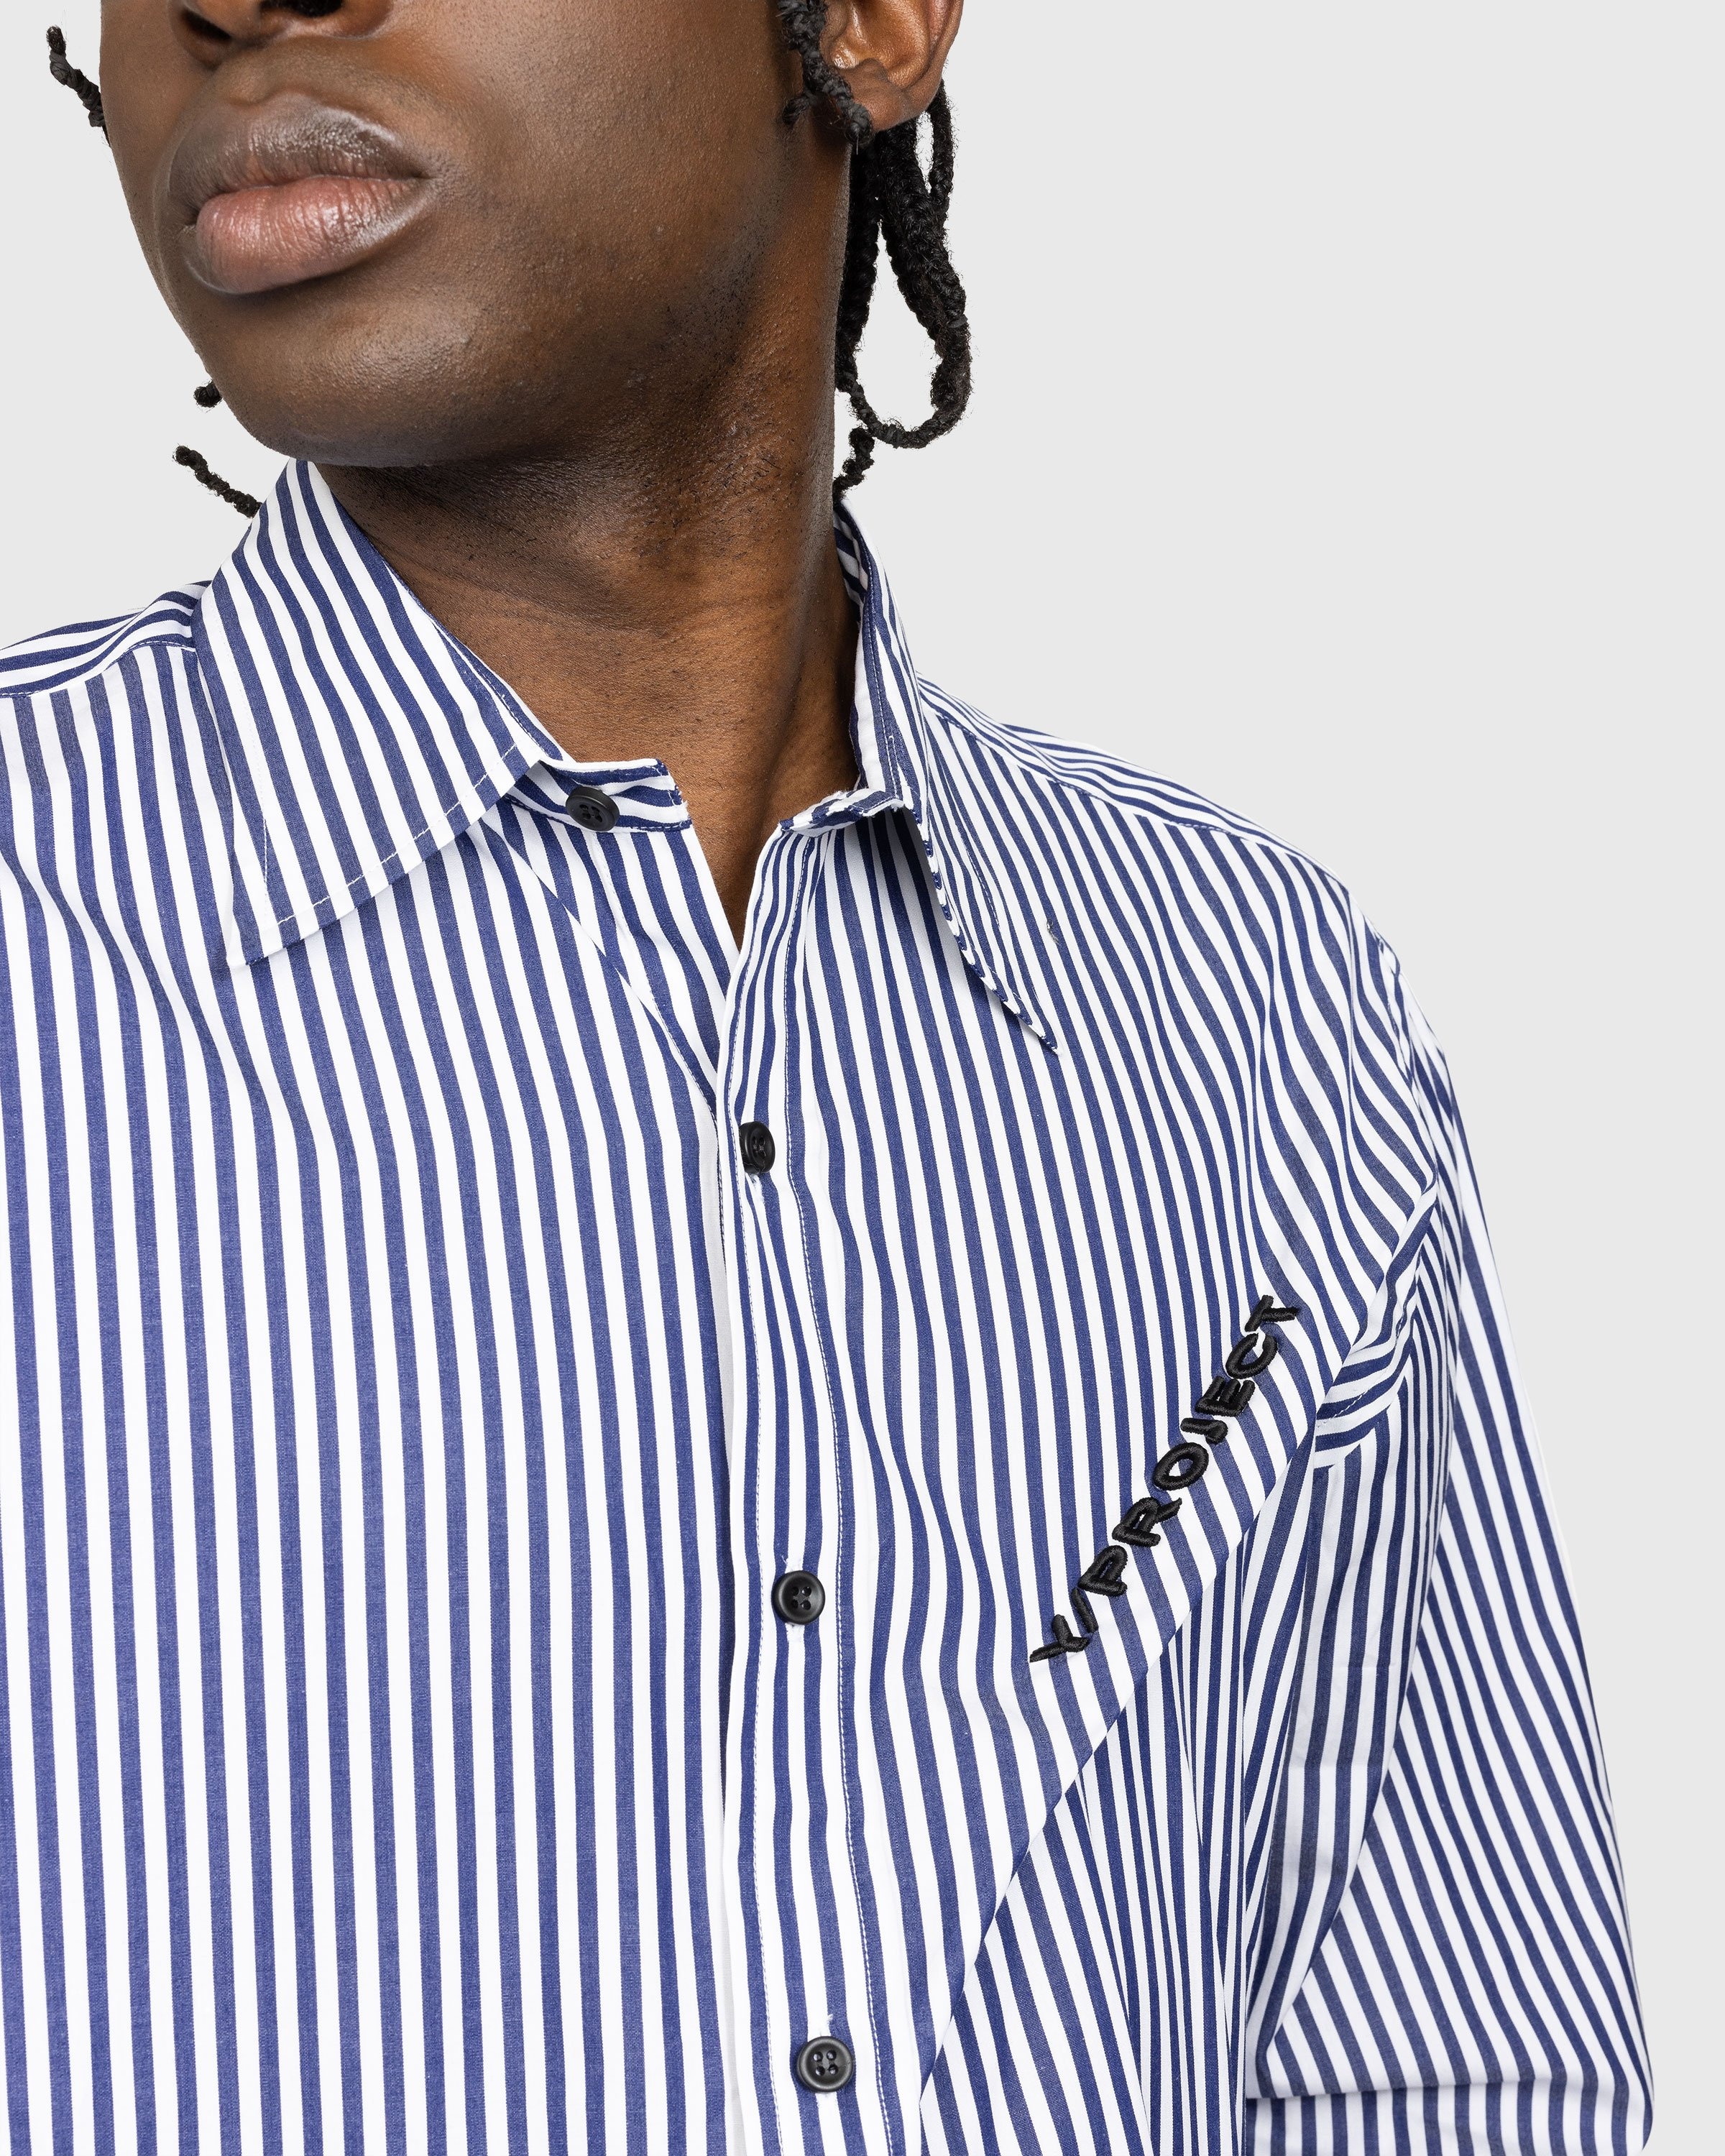 Y/Project – Pinched Logo Stripe Shirt Navy/White - Shirts - Blue - Image 4